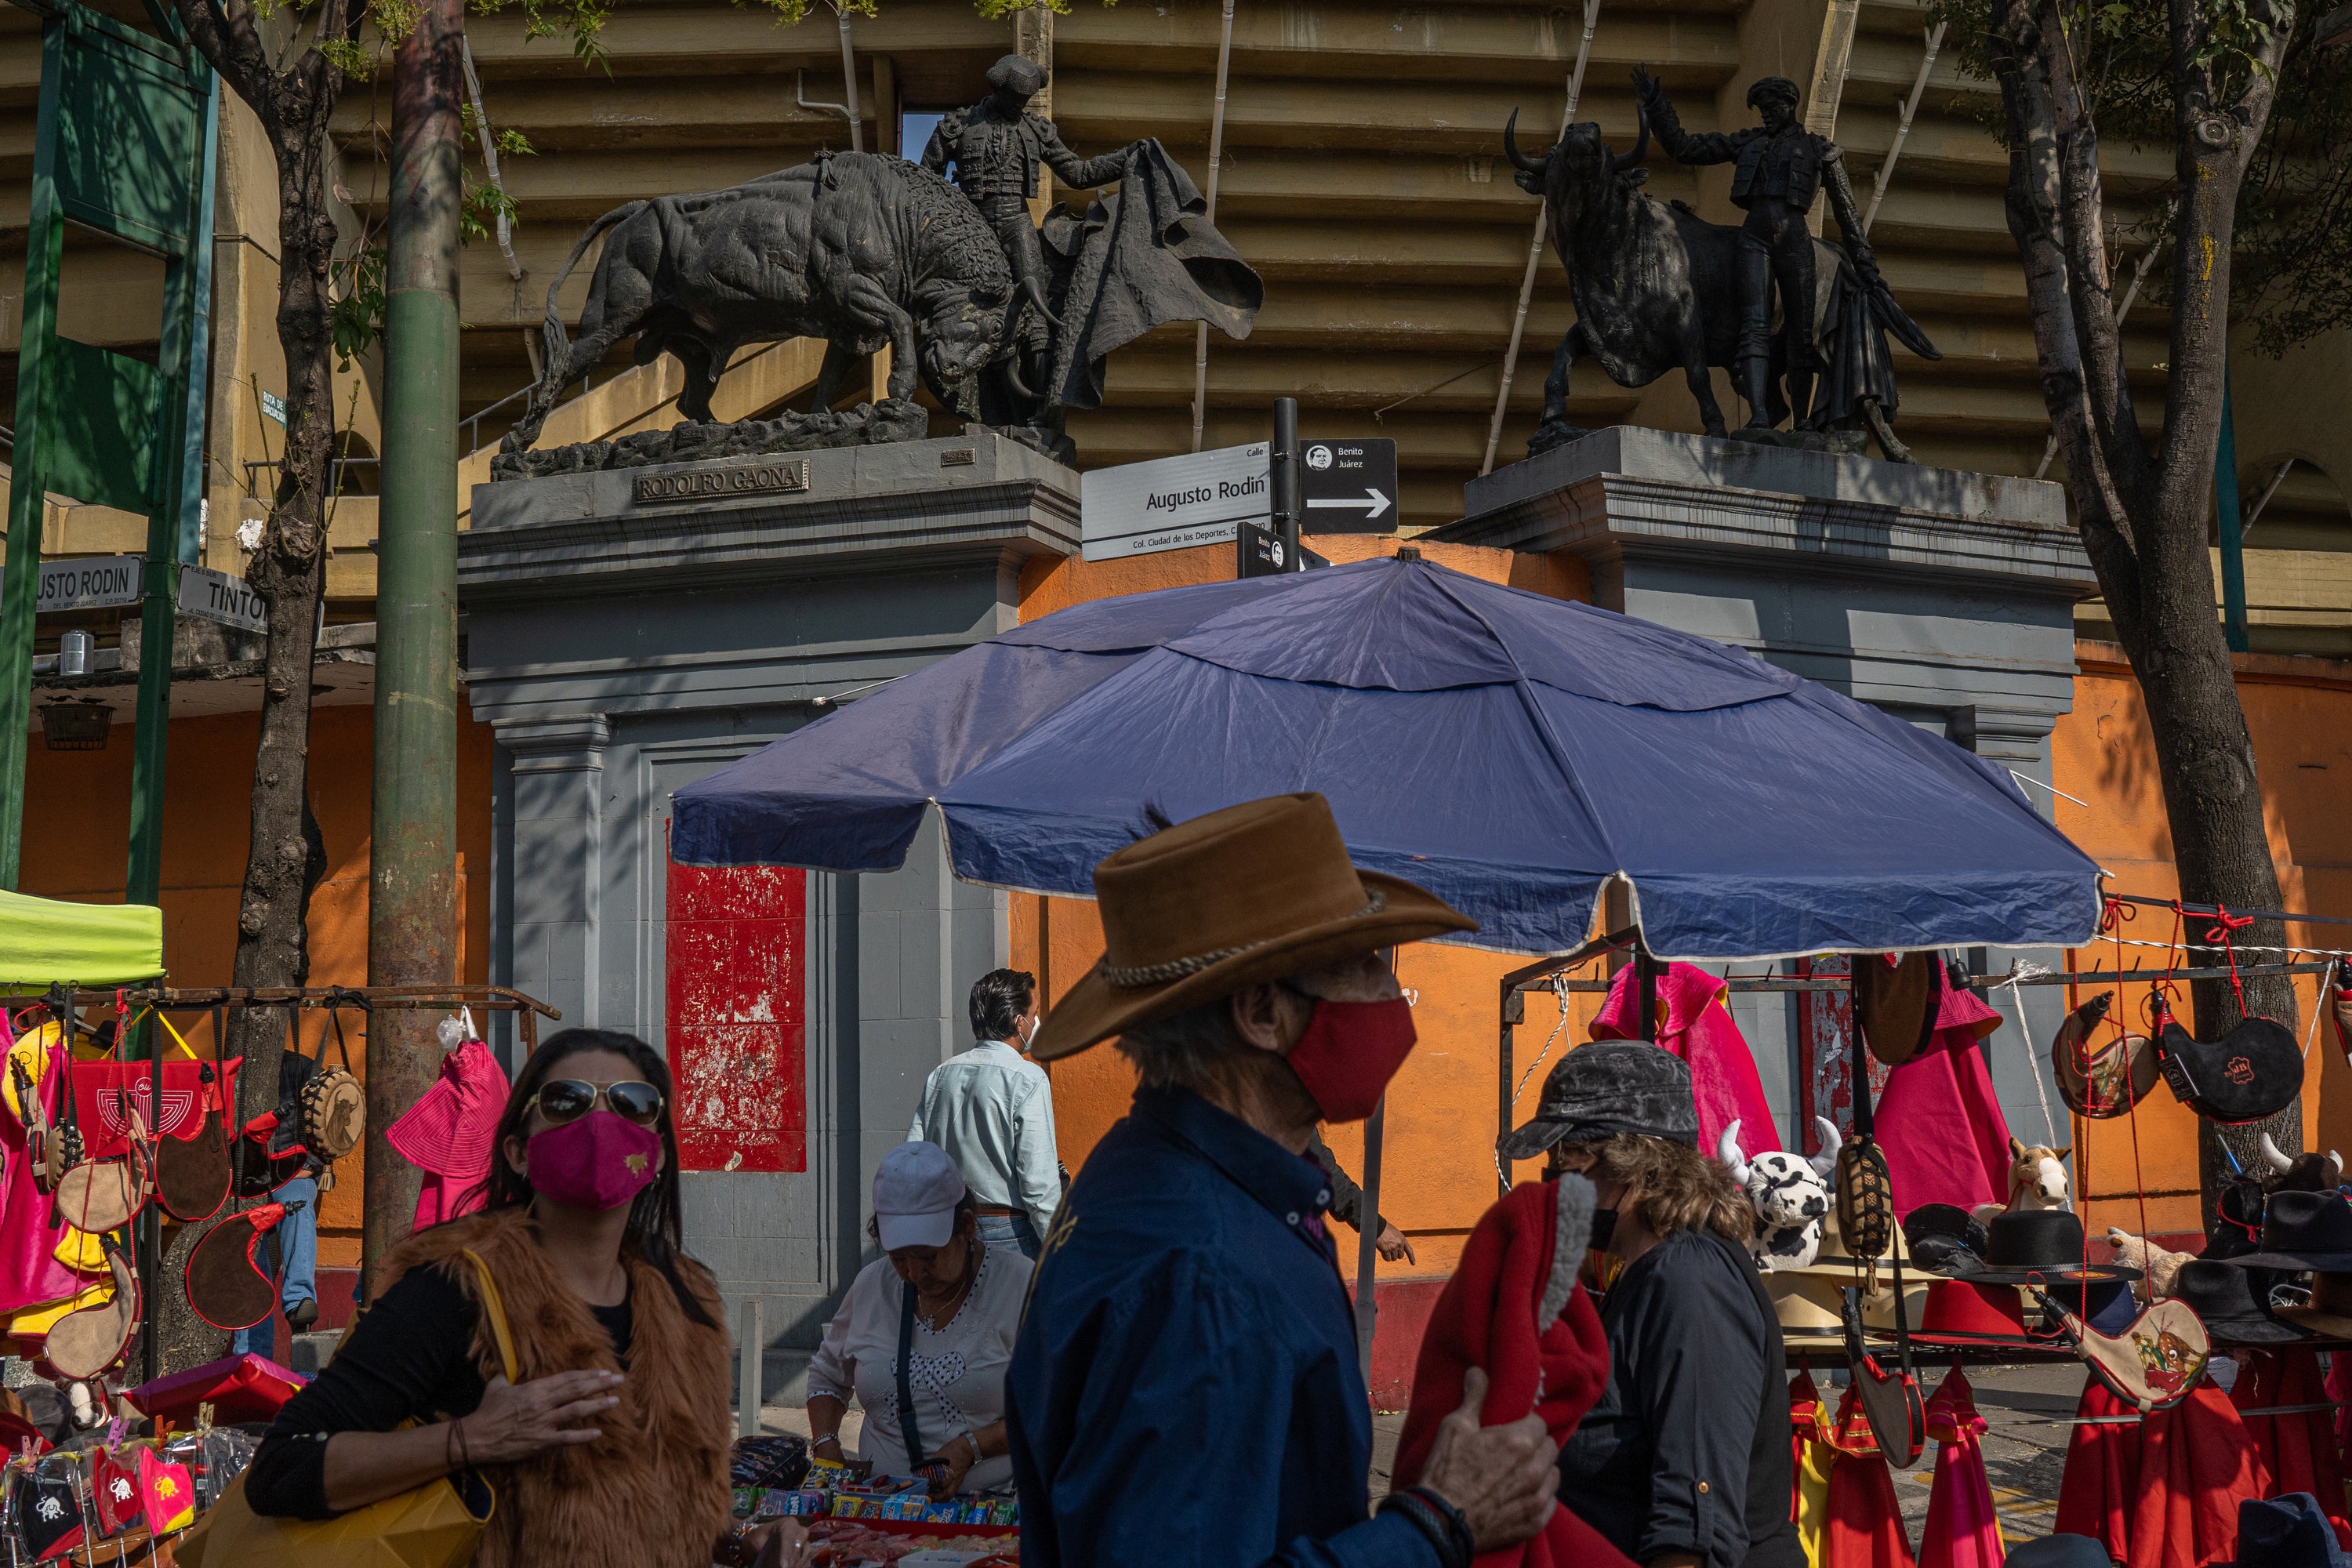 Vendors sell bullfighting merchandise outside the stadium in Mexico City